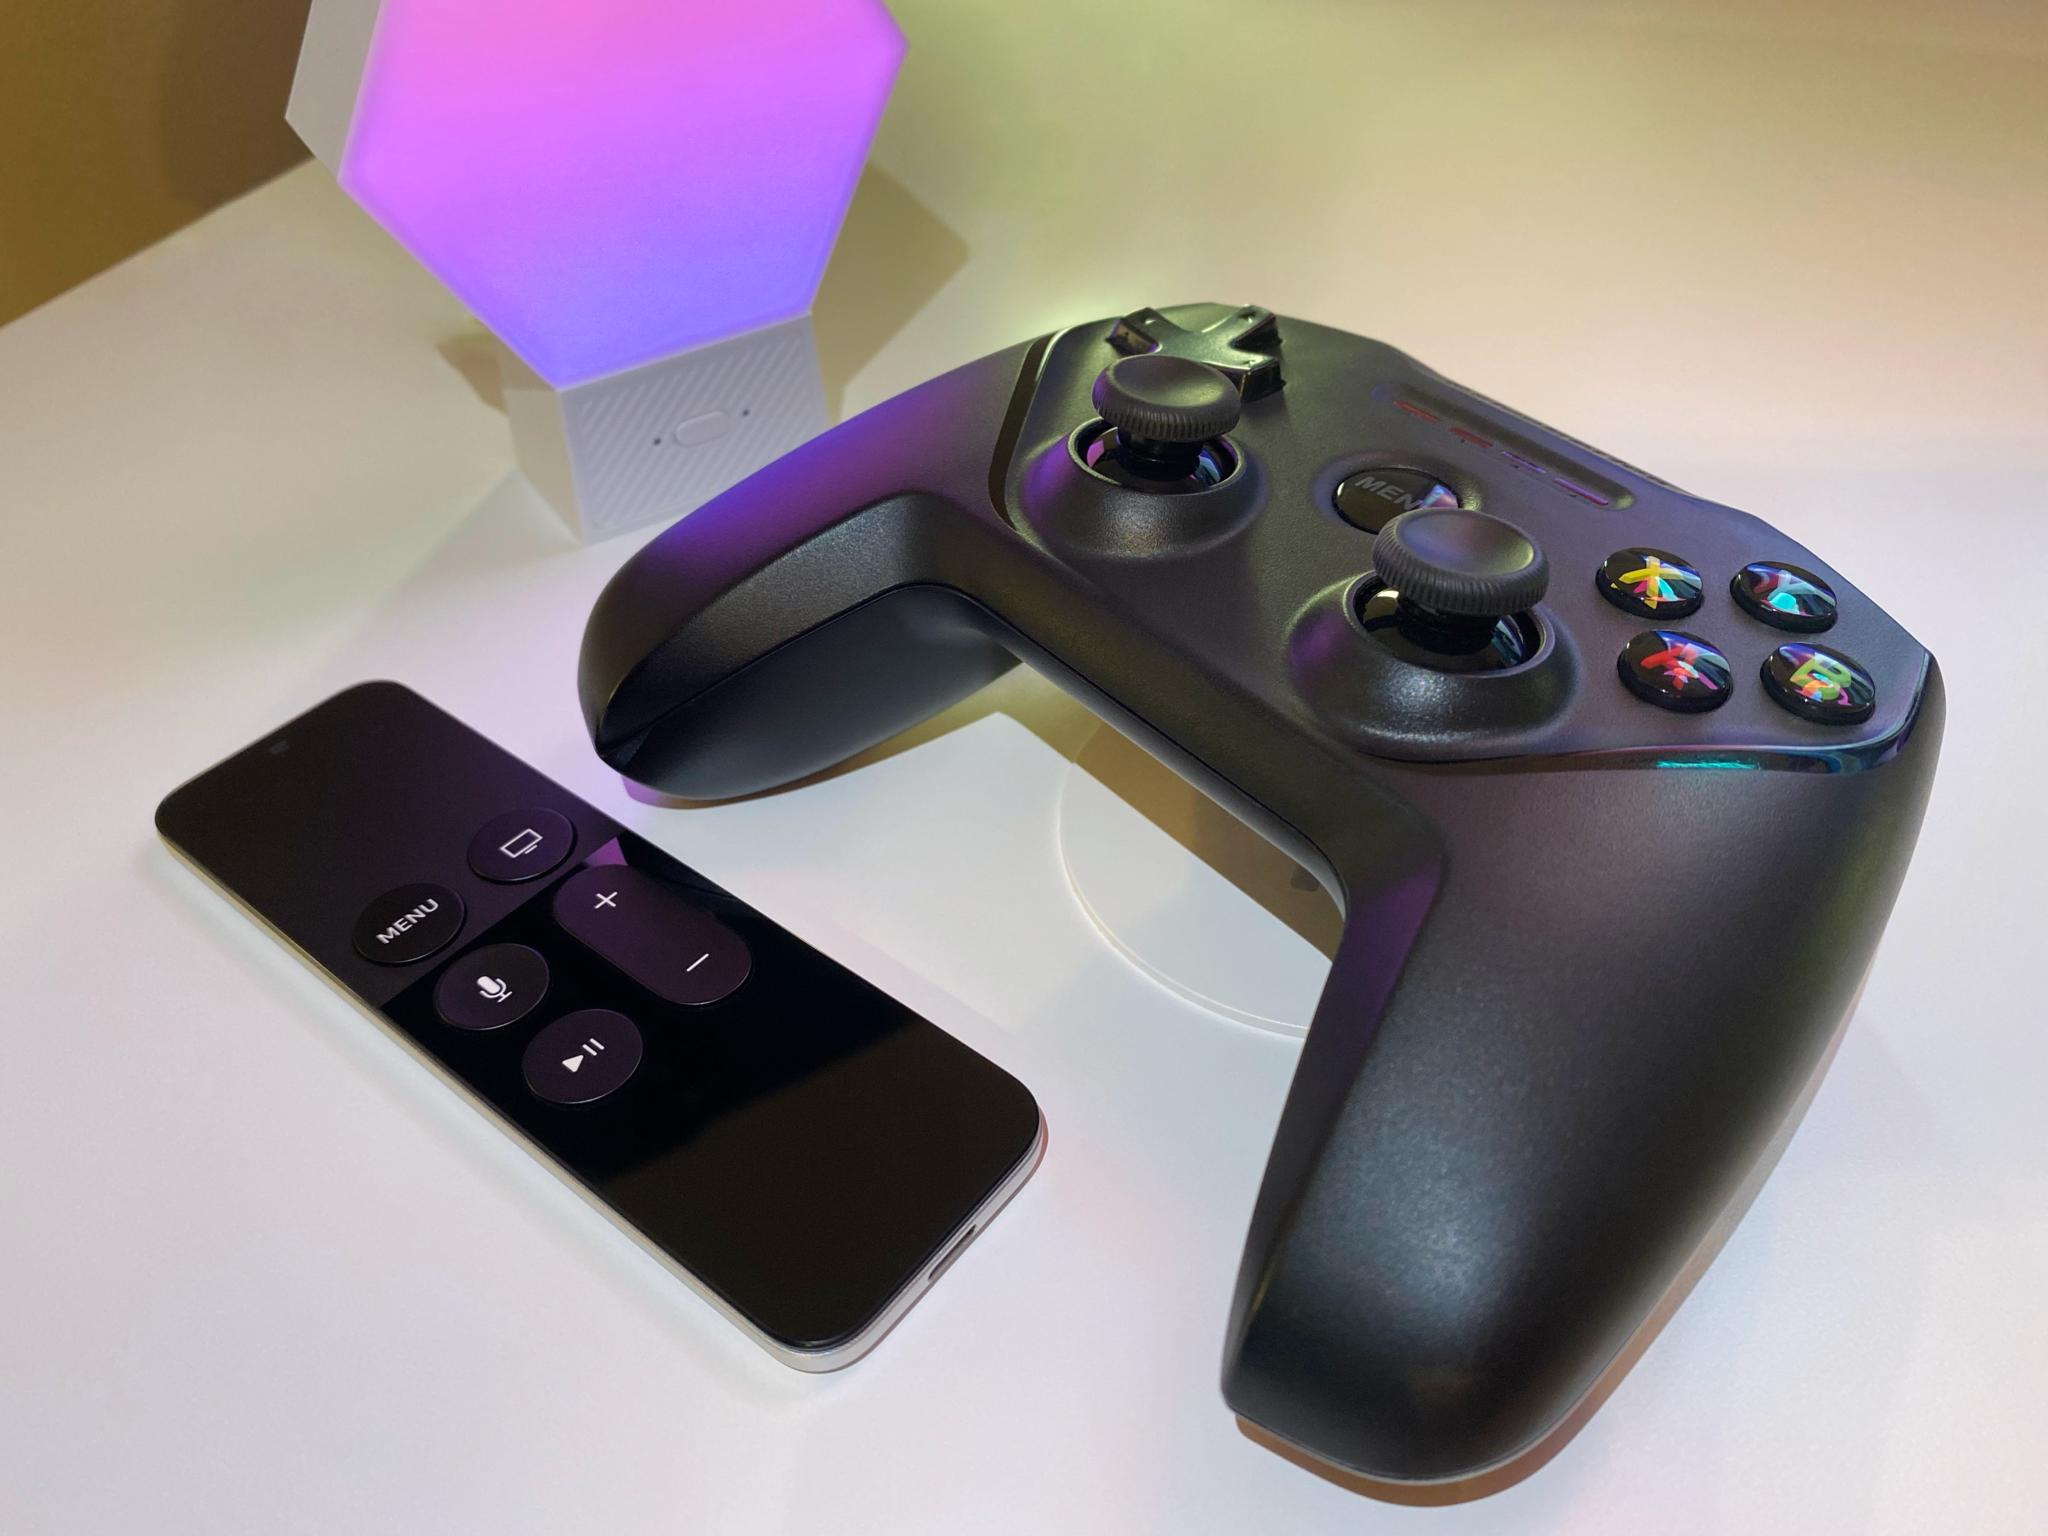 Tvos14 review Game Controller and Remote